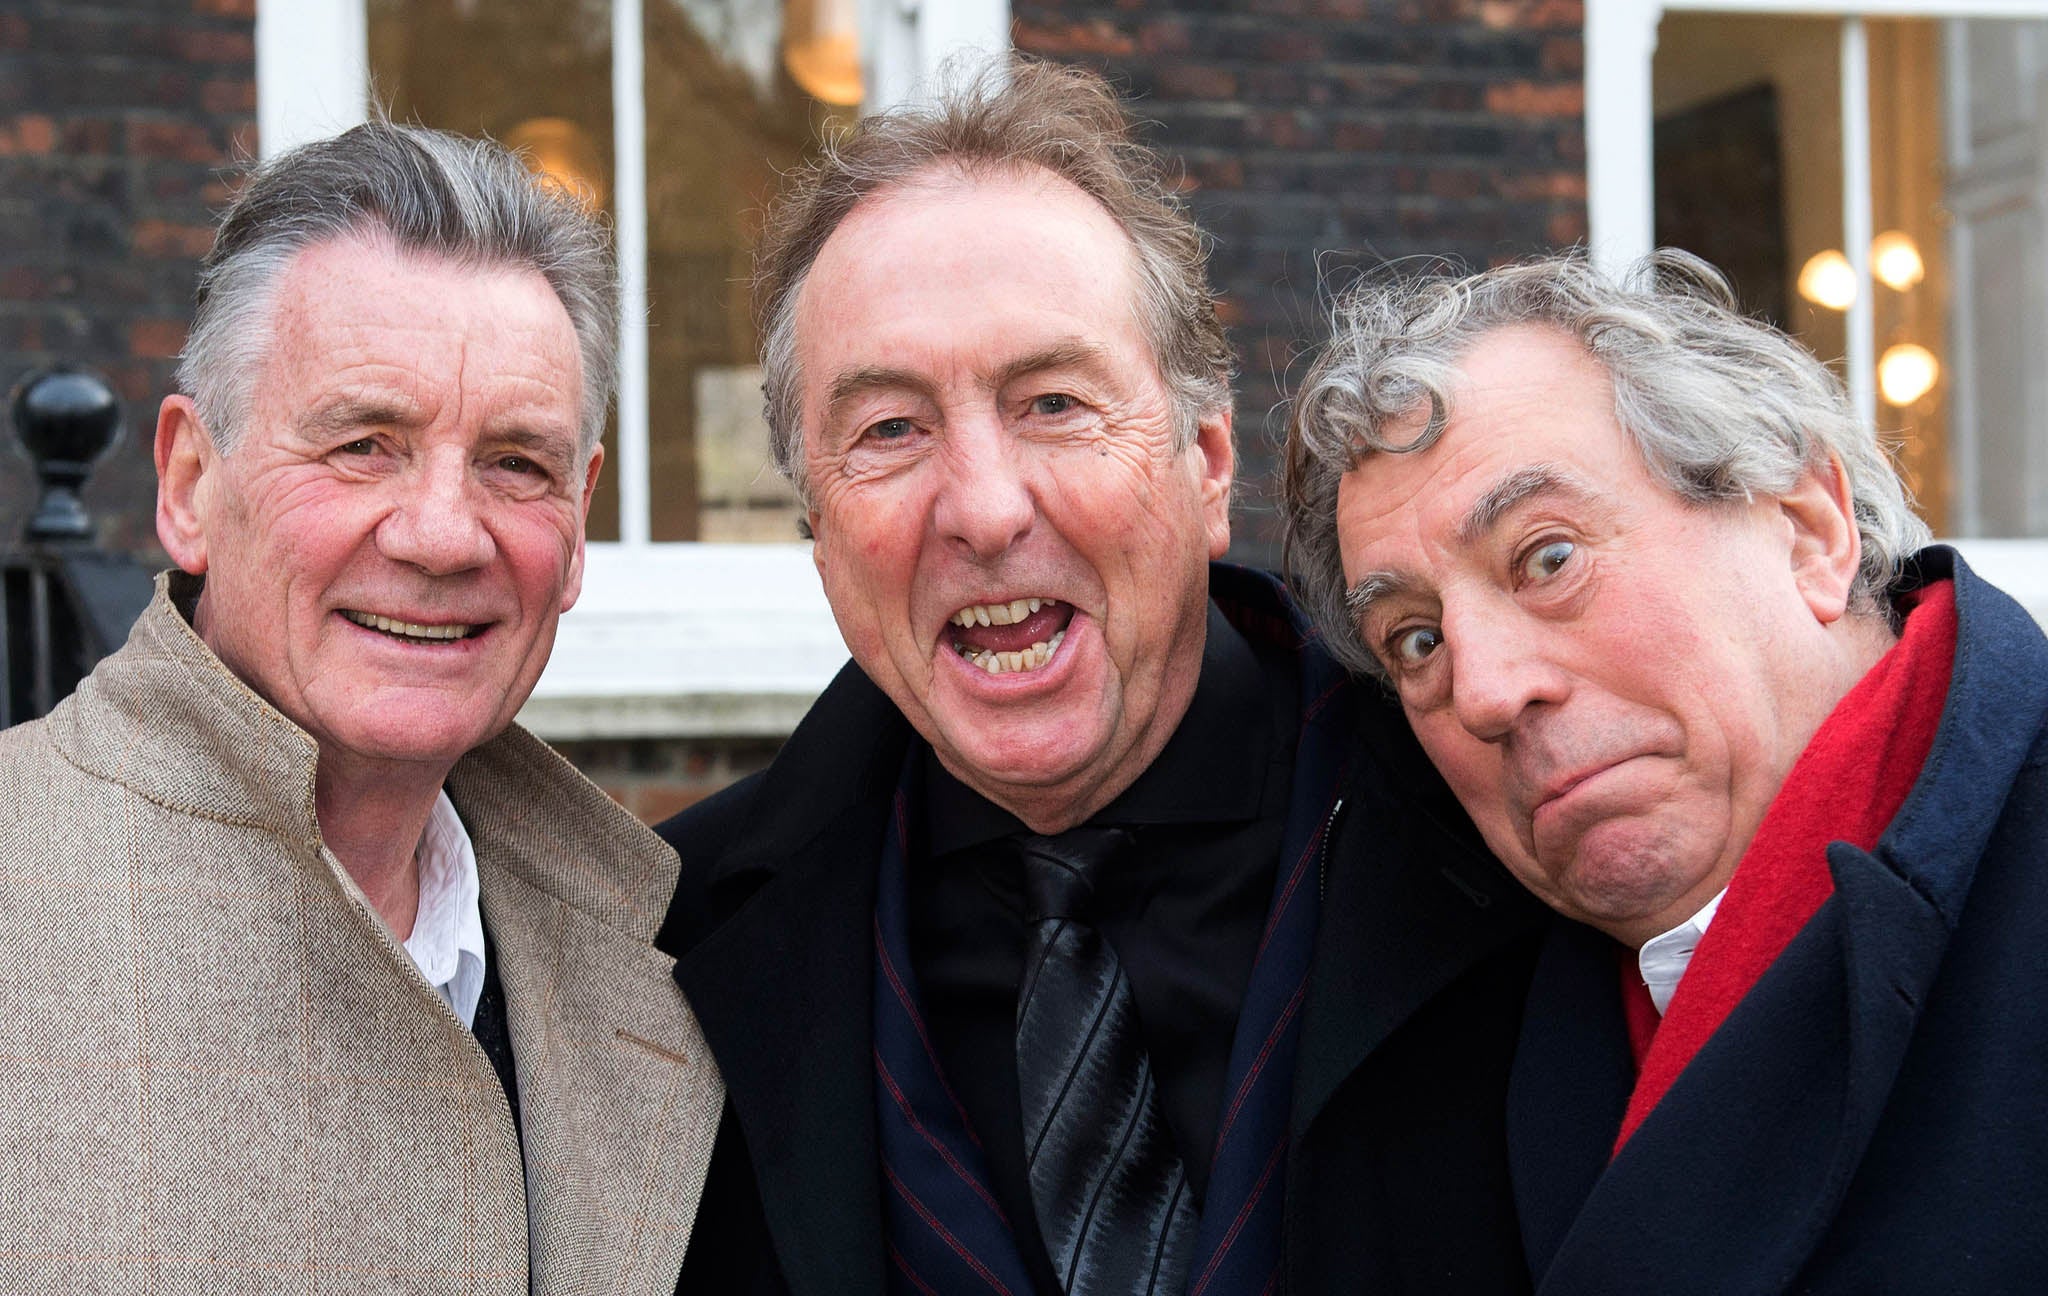 Michael Palin, Eric Idle and Terry Jones of Monty Python pose together ahead of a legal case at the High Court in a dispute over the hit musical Spamalot on 30 November. The Pythons lost the dispute and Mark Forstater, who produced the 1975 film Monty Pyt